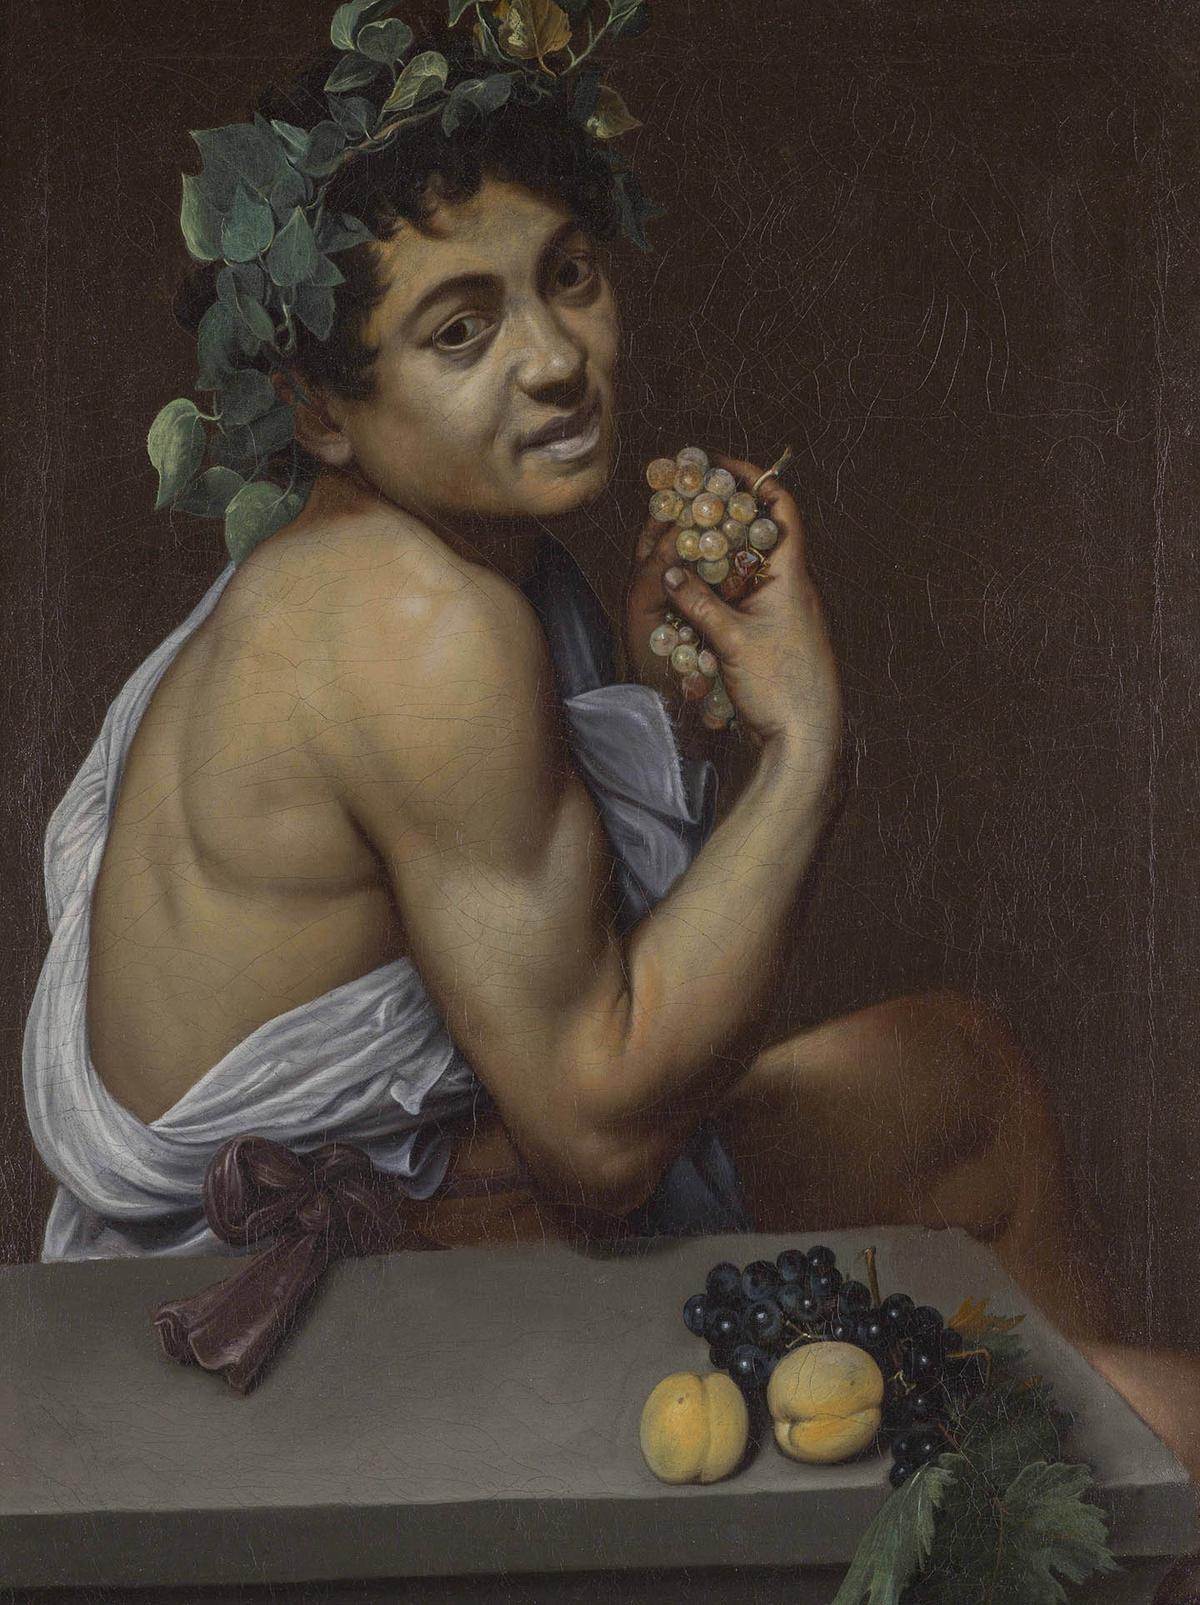 "Self-portrait in the guise of Bacchus or “Sick Bacchus,” 1593, by Caravaggio. Oil on canvas. Borghese Gallery, Rome. (Public Domain)